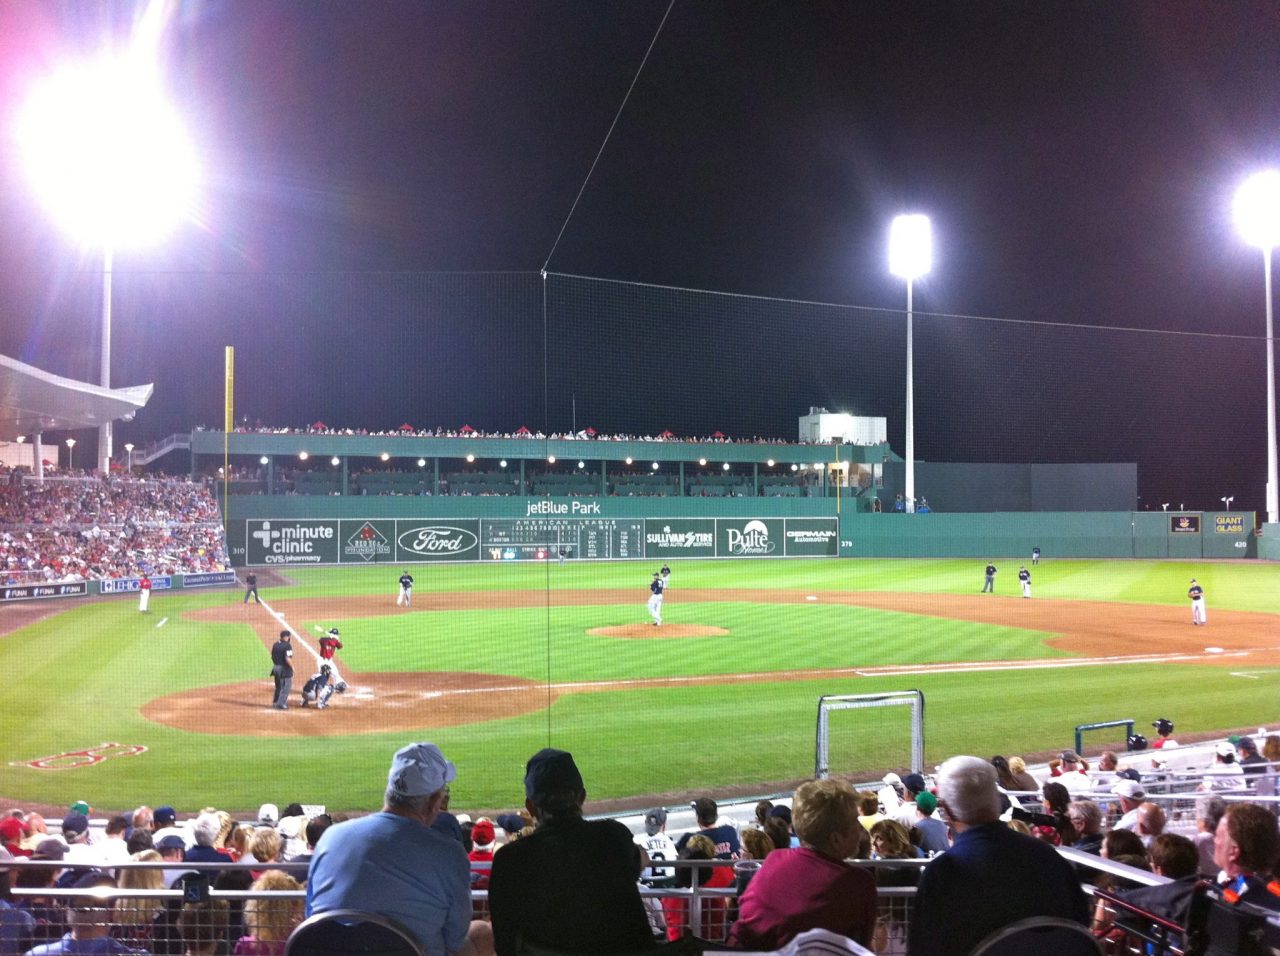 Spring Training: The Best Way To Watch Baseball